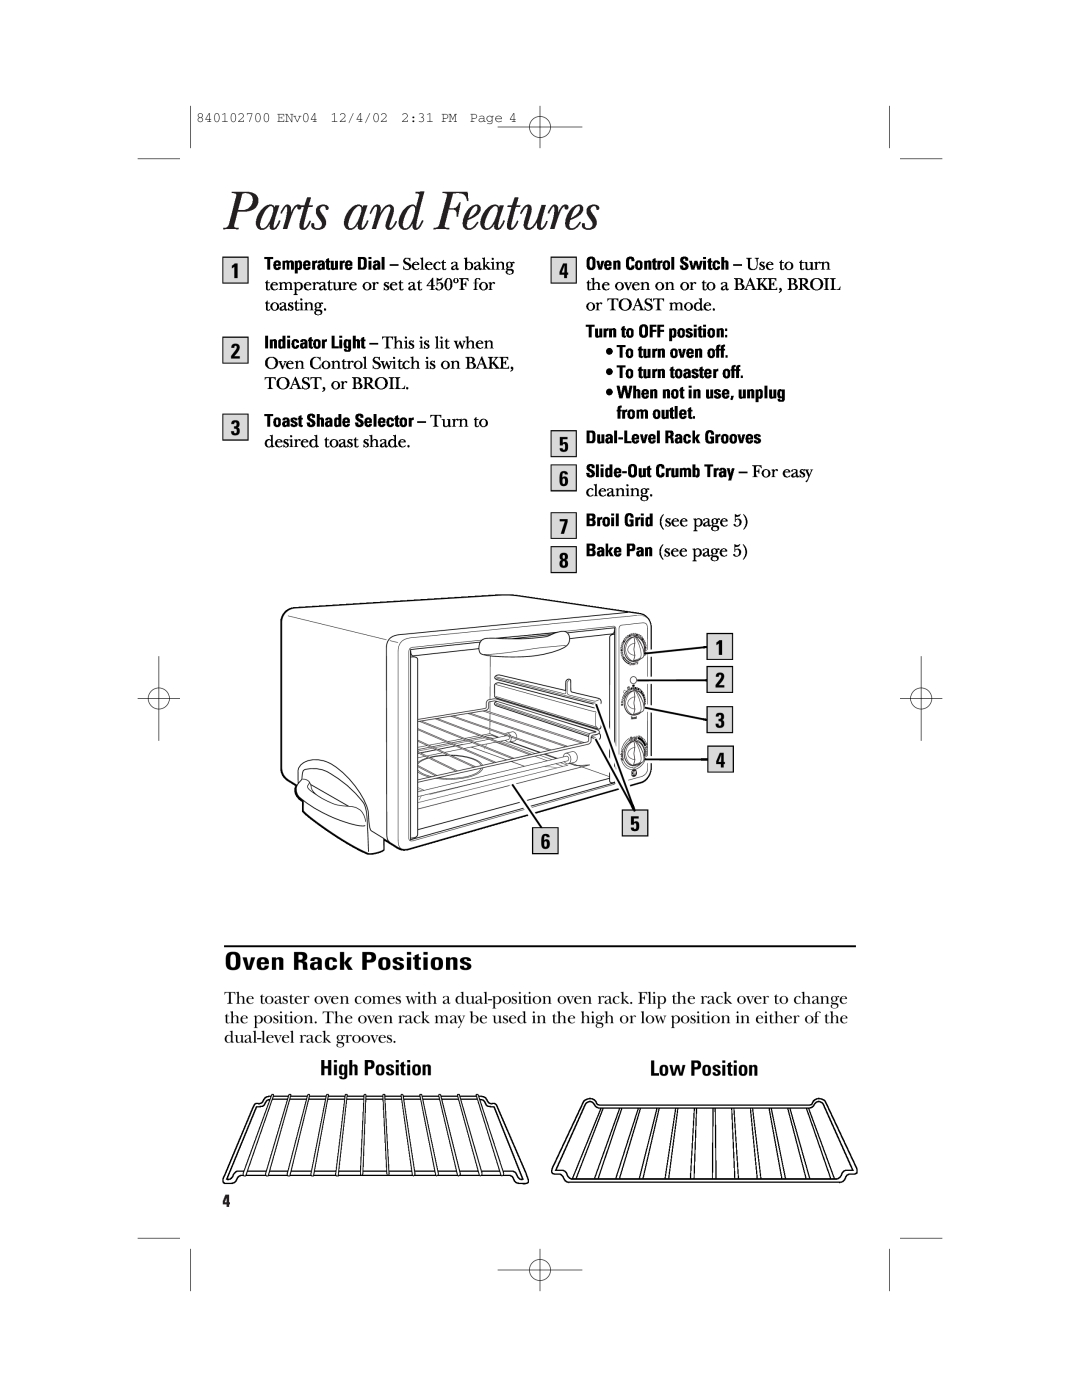 GE 106686 Parts and Features, Oven Rack Positions, High Position, Turn to OFF position To turn oven off, Low Position 